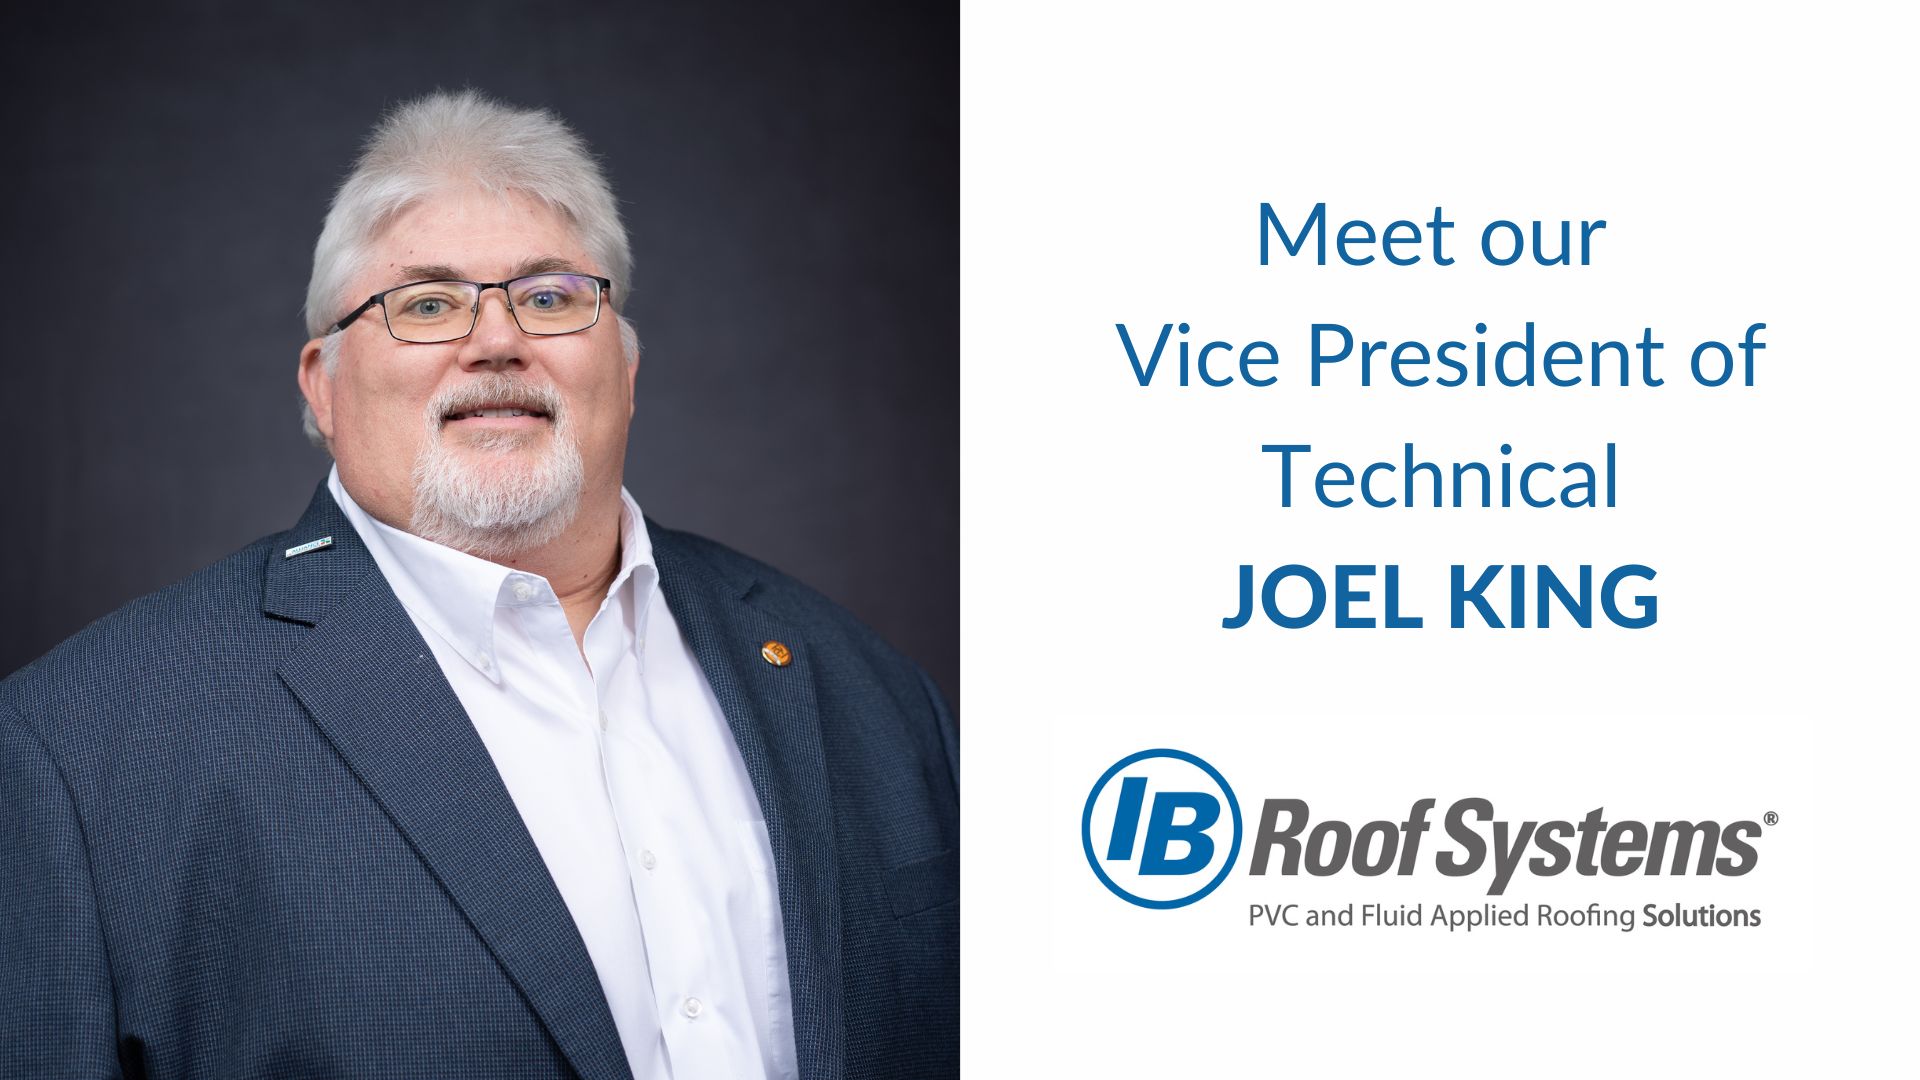 Joel King has been promoted to Vice President of Technical at IB Roof Systems